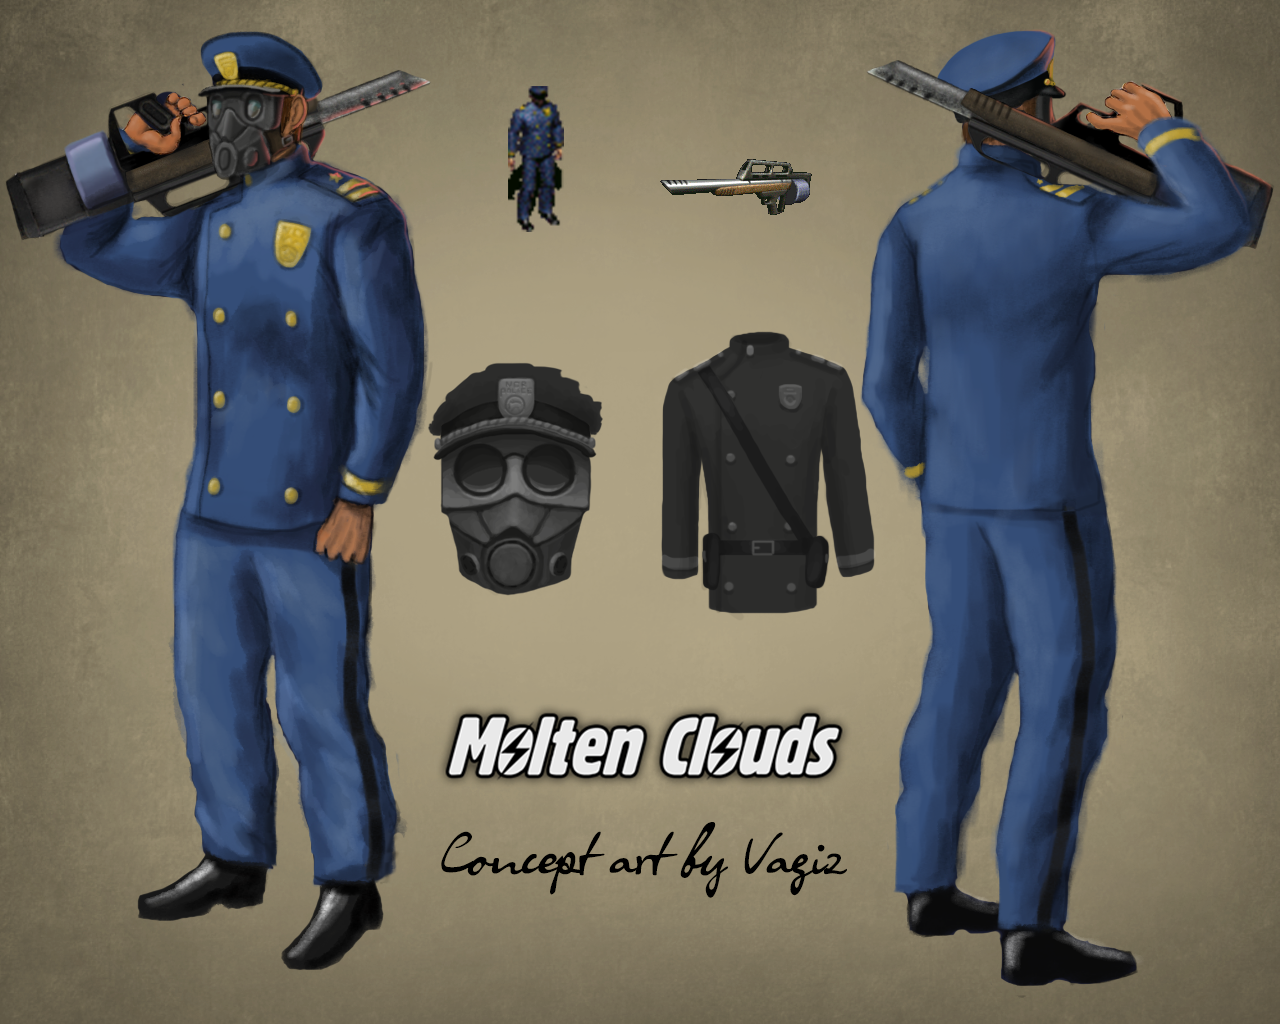 Ncr Police Officer Image The Chosen S Way Mod For Fallout New Vegas Mod Db